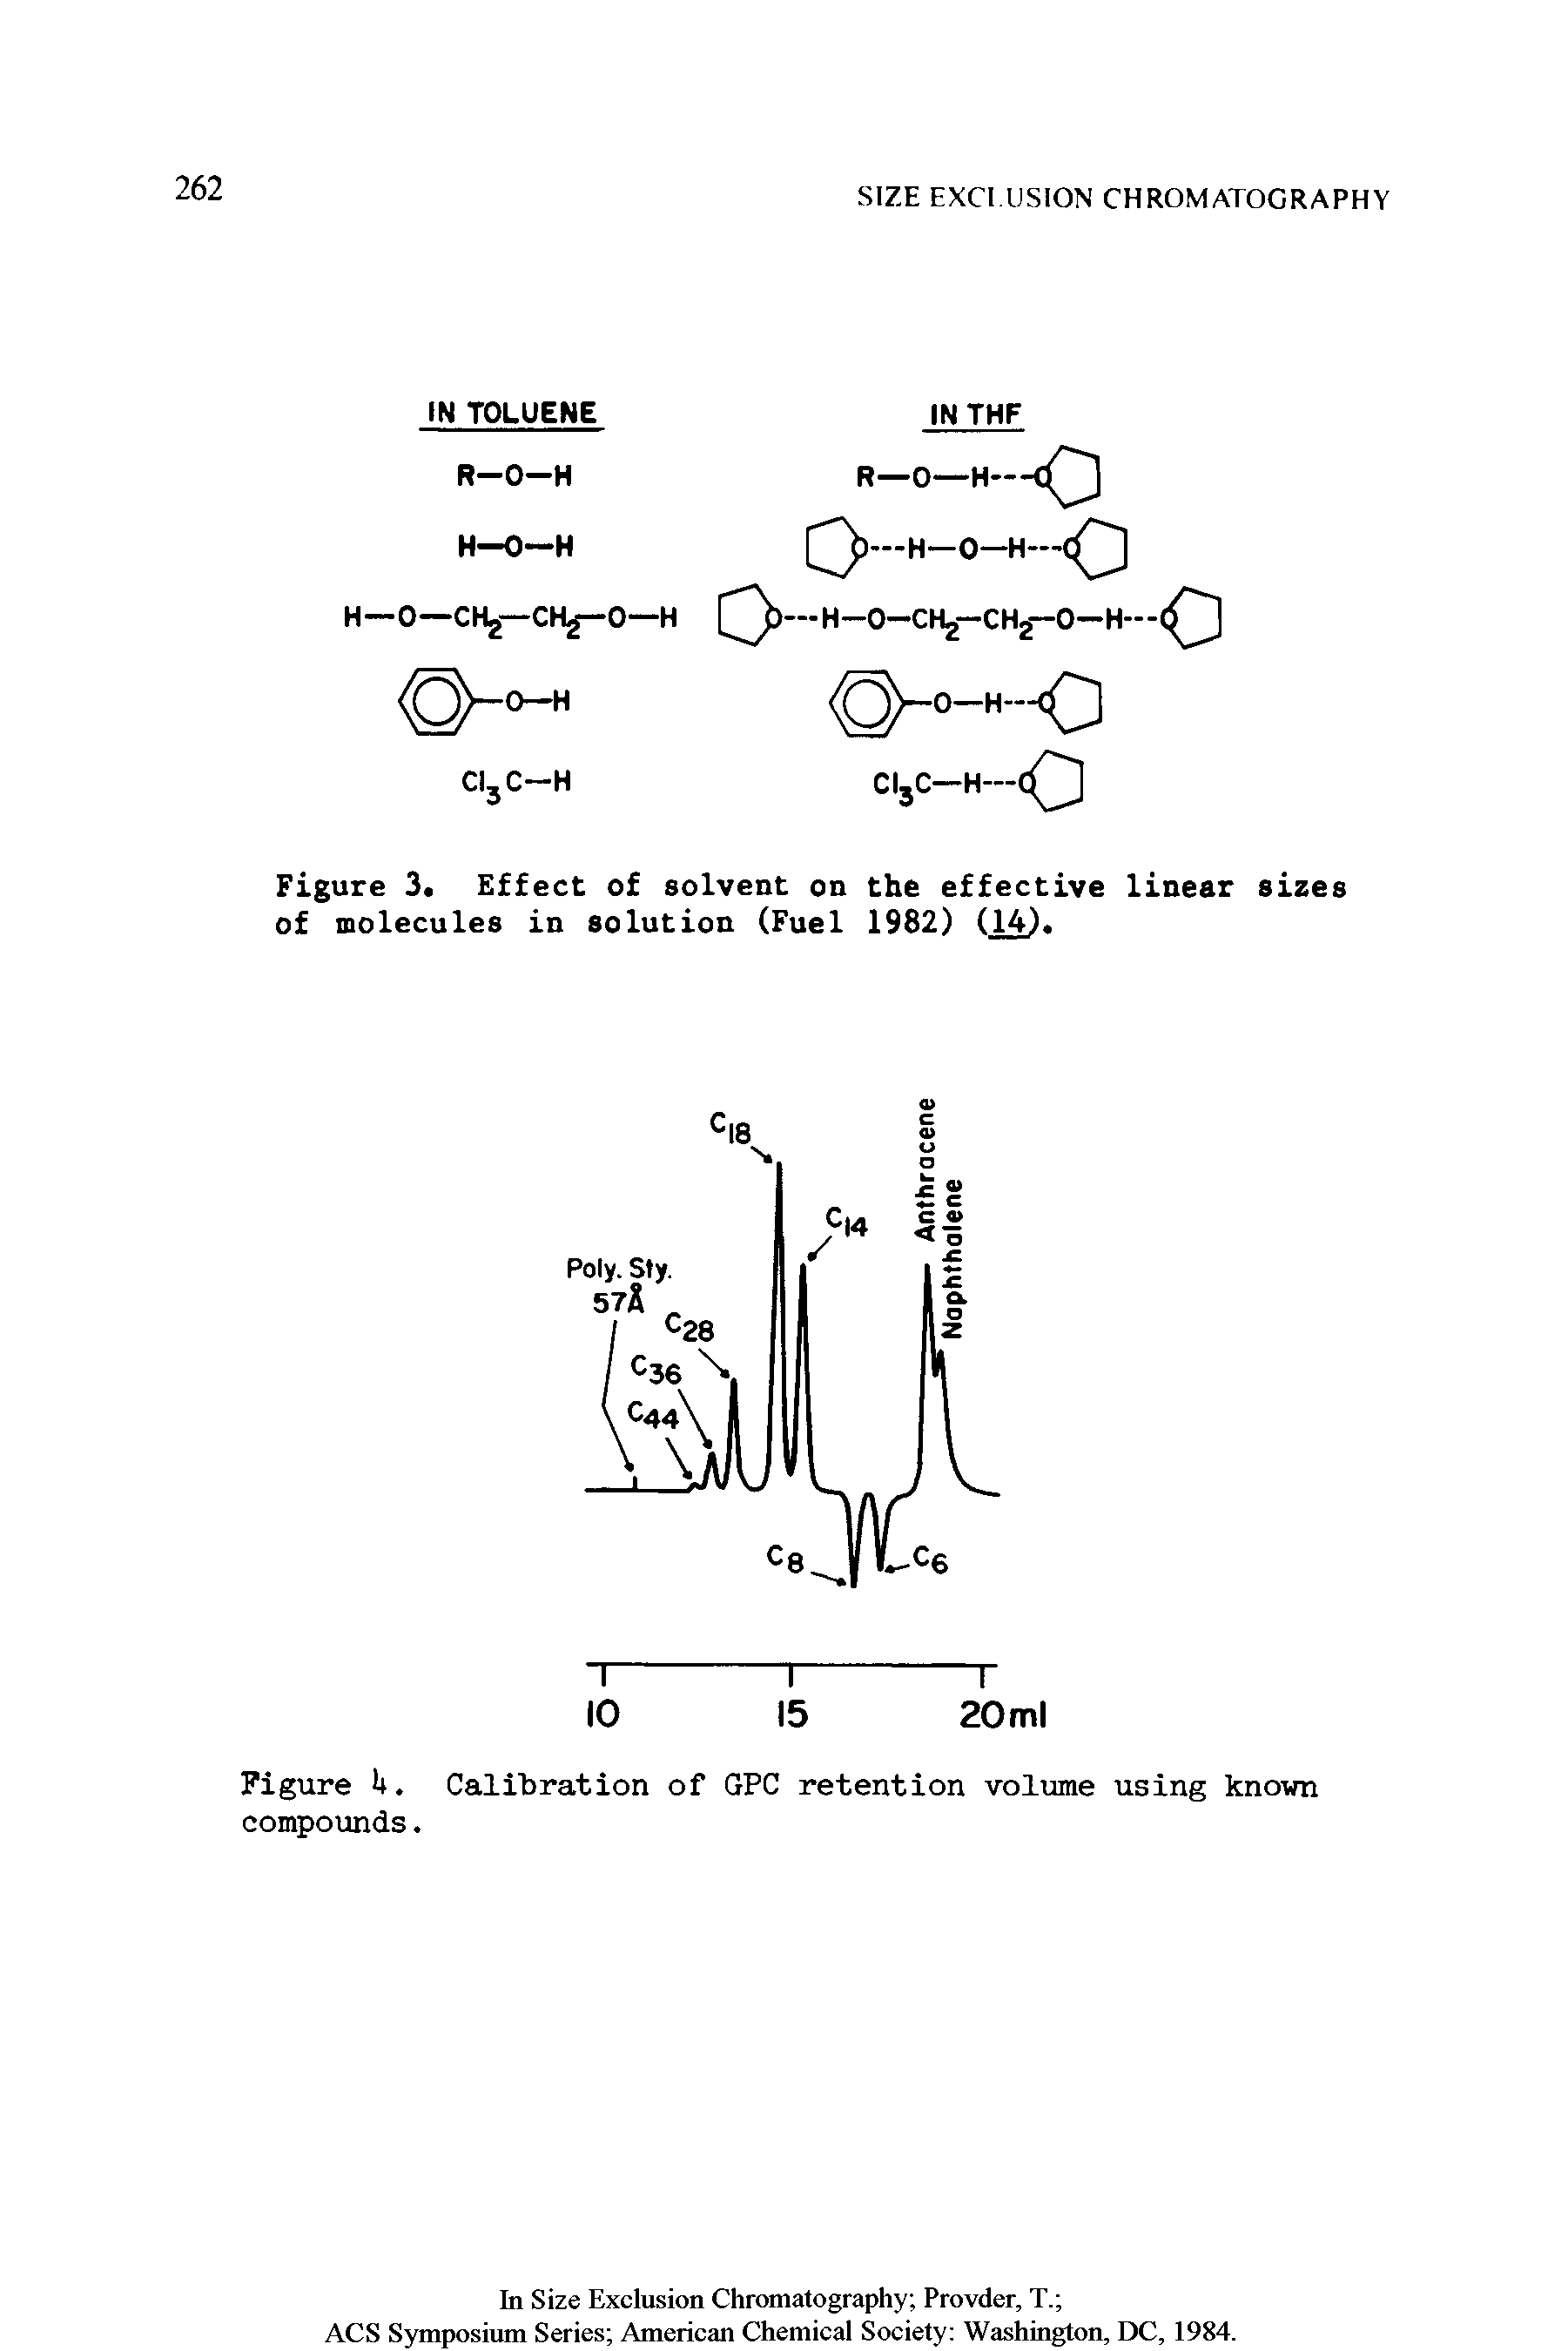 Figure 3. Effect of solvent on the effective linear sizes of molecules in solution (Fuel 1982) (14) ...